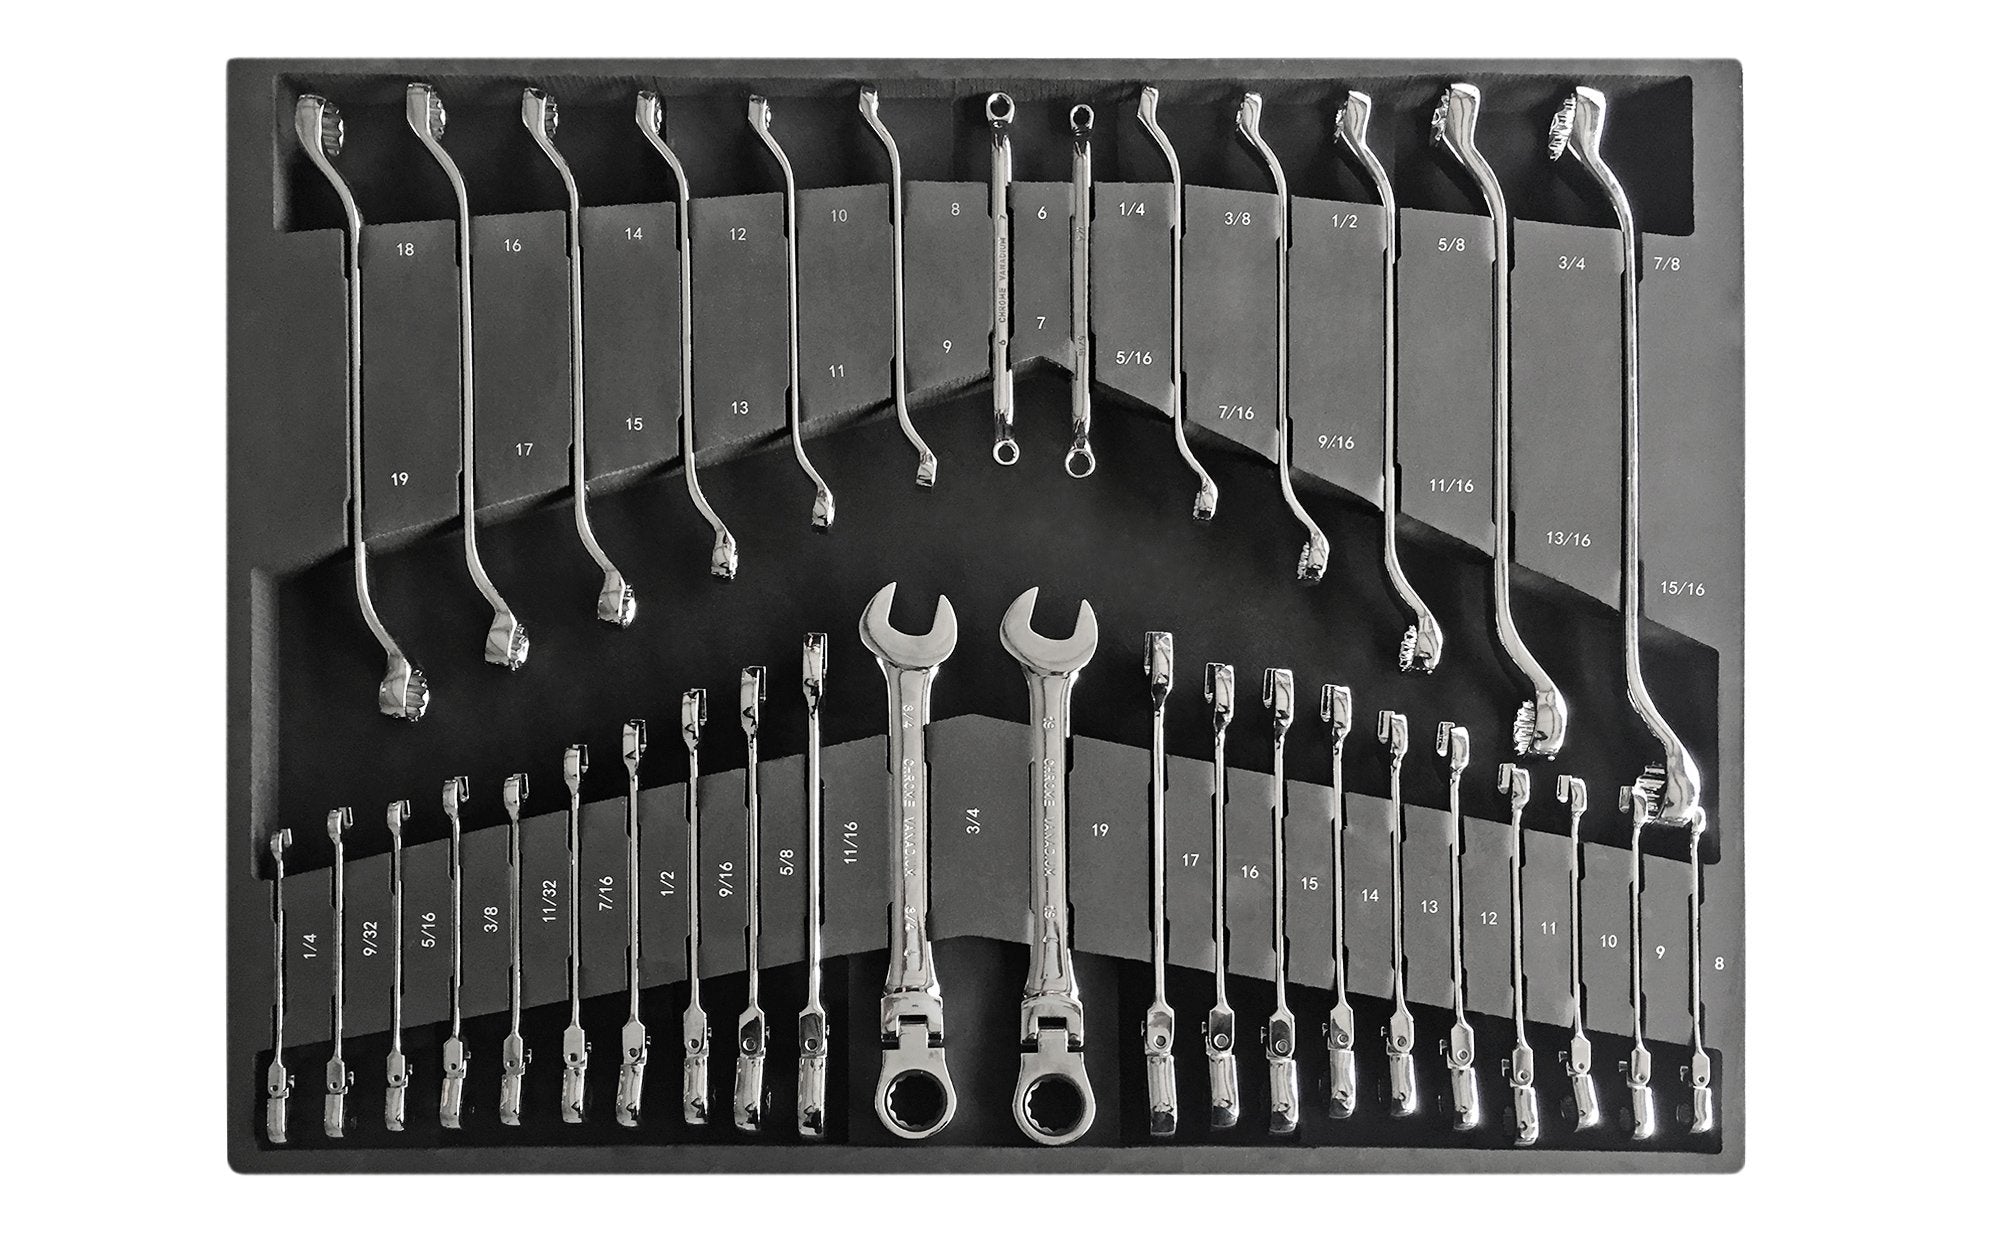 Pro 3.0/Performance Plus 2.0 Wrench Tray